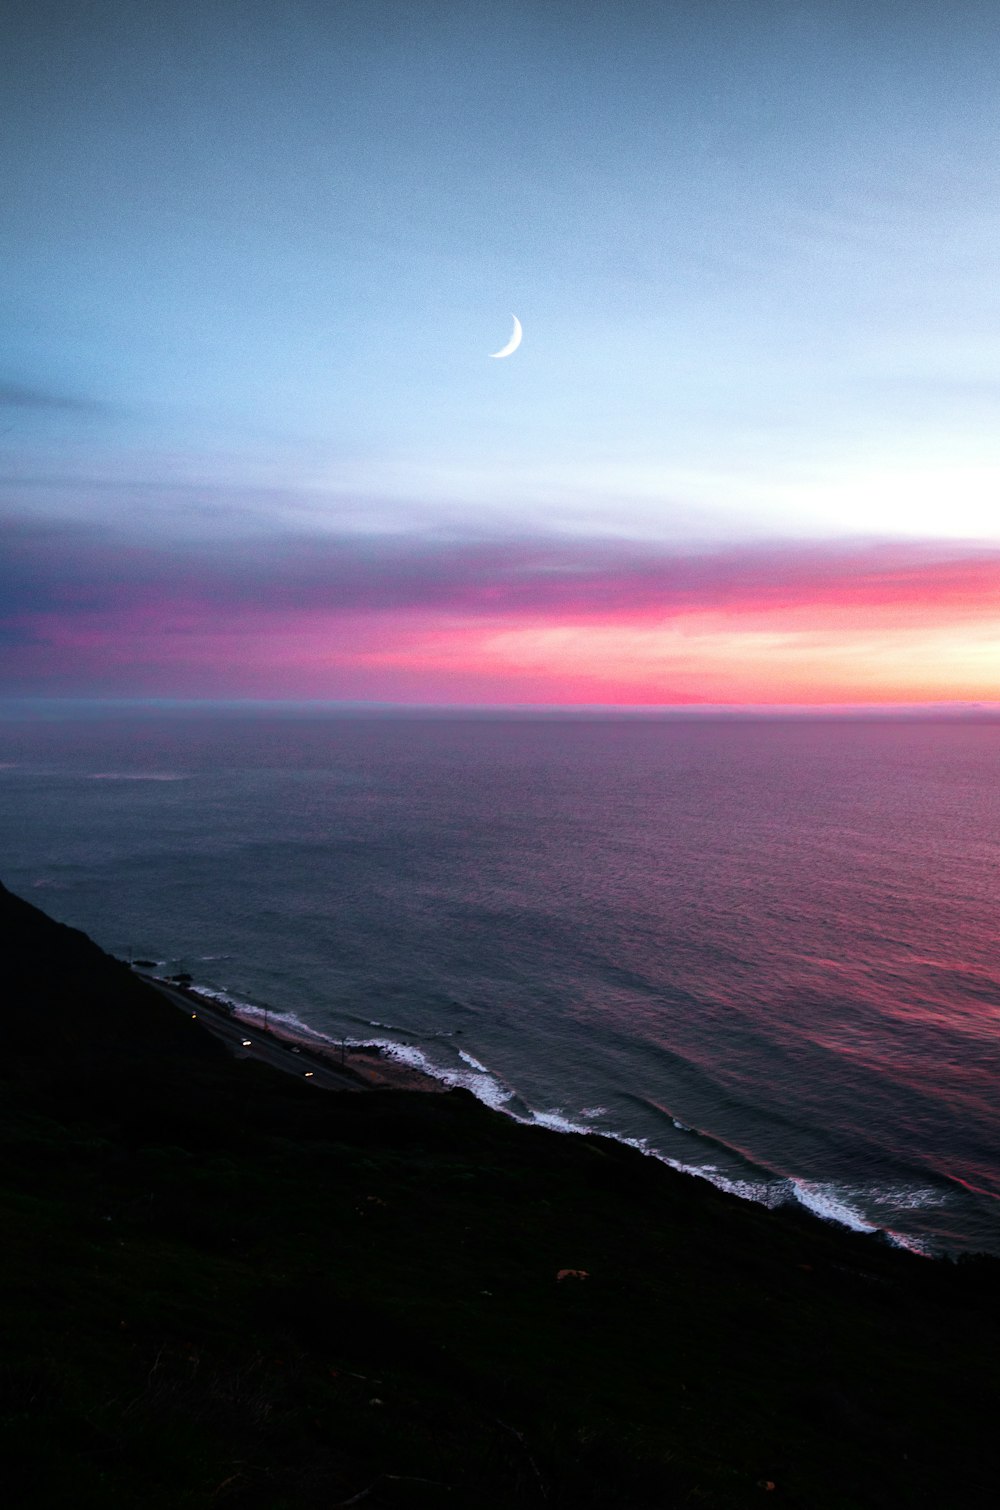 a sunset over the ocean with a half moon in the sky